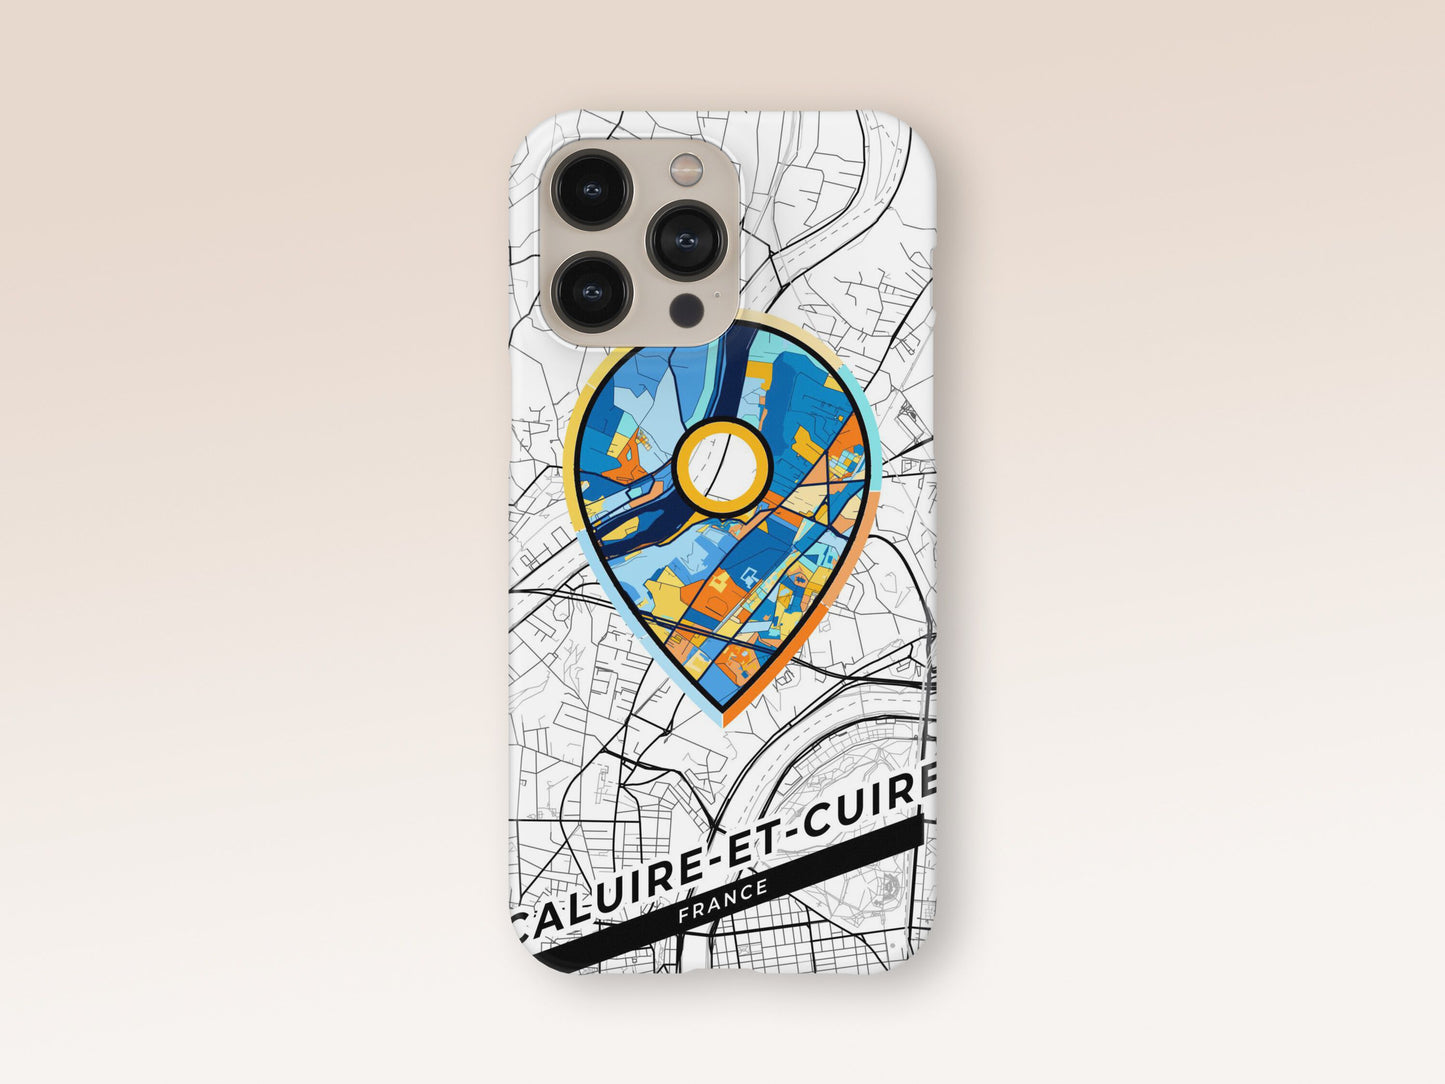 Caluire-Et-Cuire France slim phone case with colorful icon. Birthday, wedding or housewarming gift. Couple match cases. 1